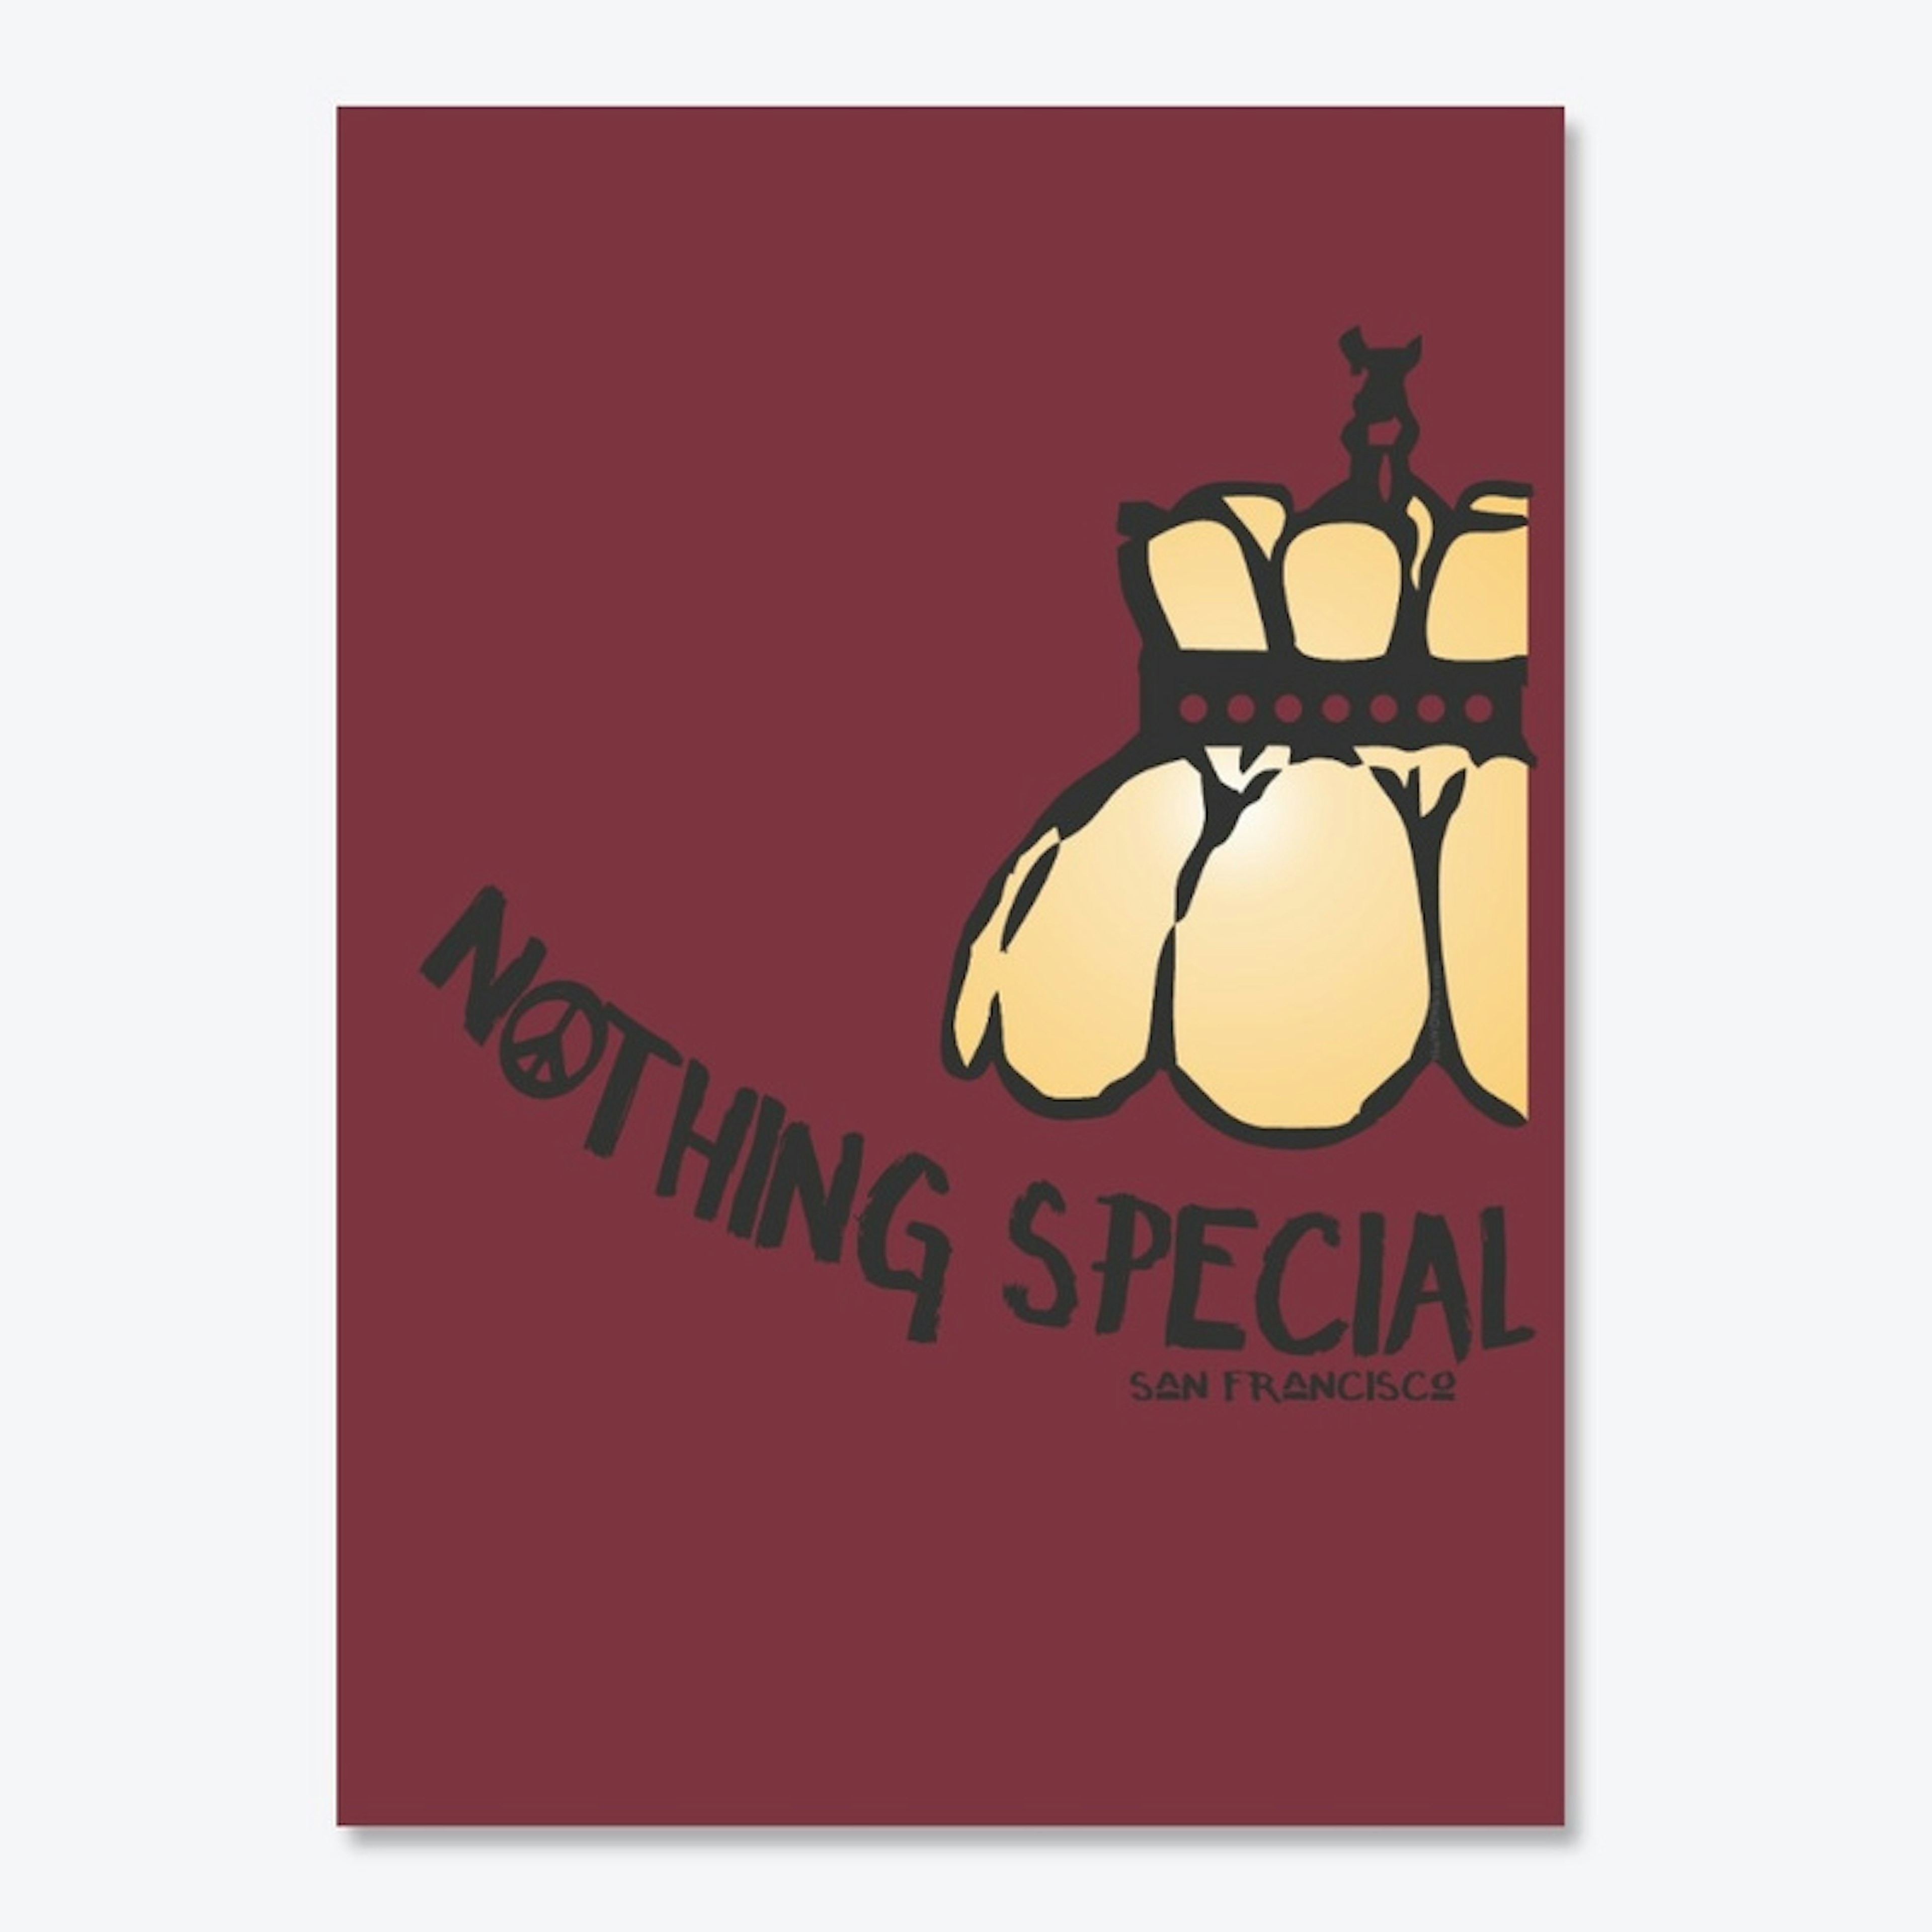 NothingSpecialSF